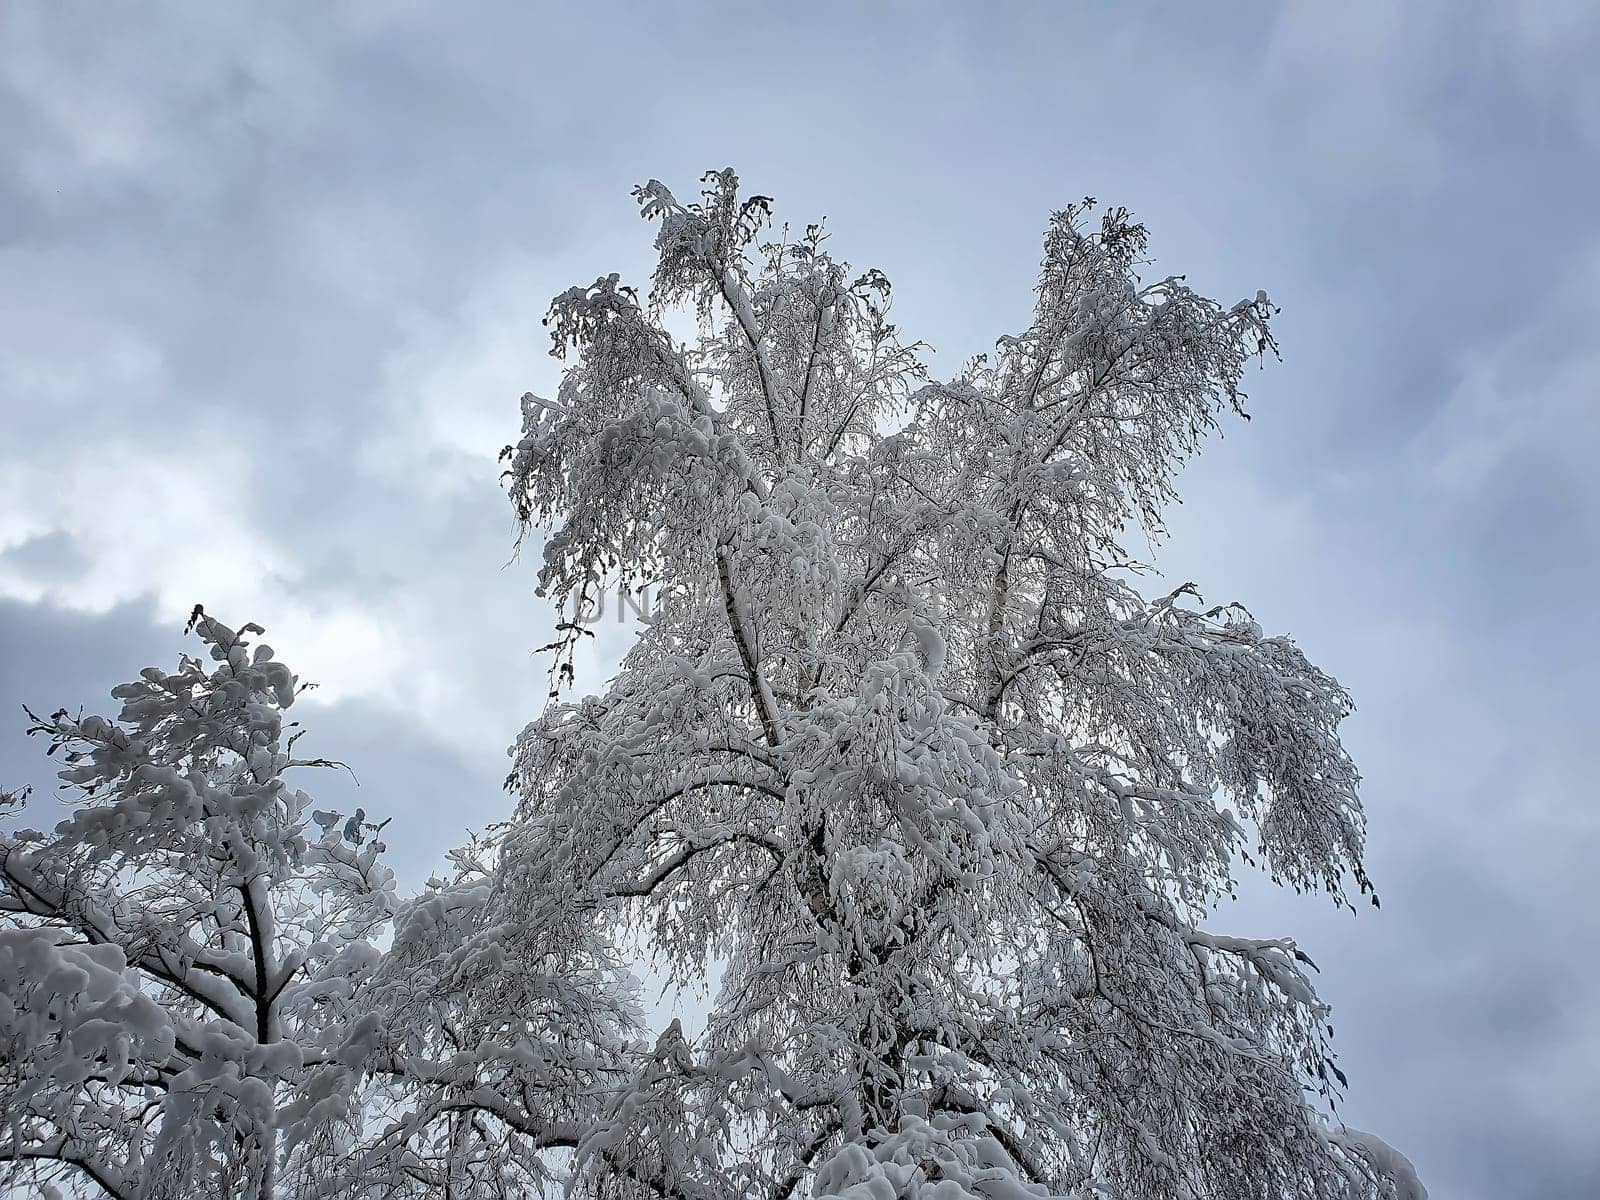 Beautiful winter tree and branches covered with snow against the sky